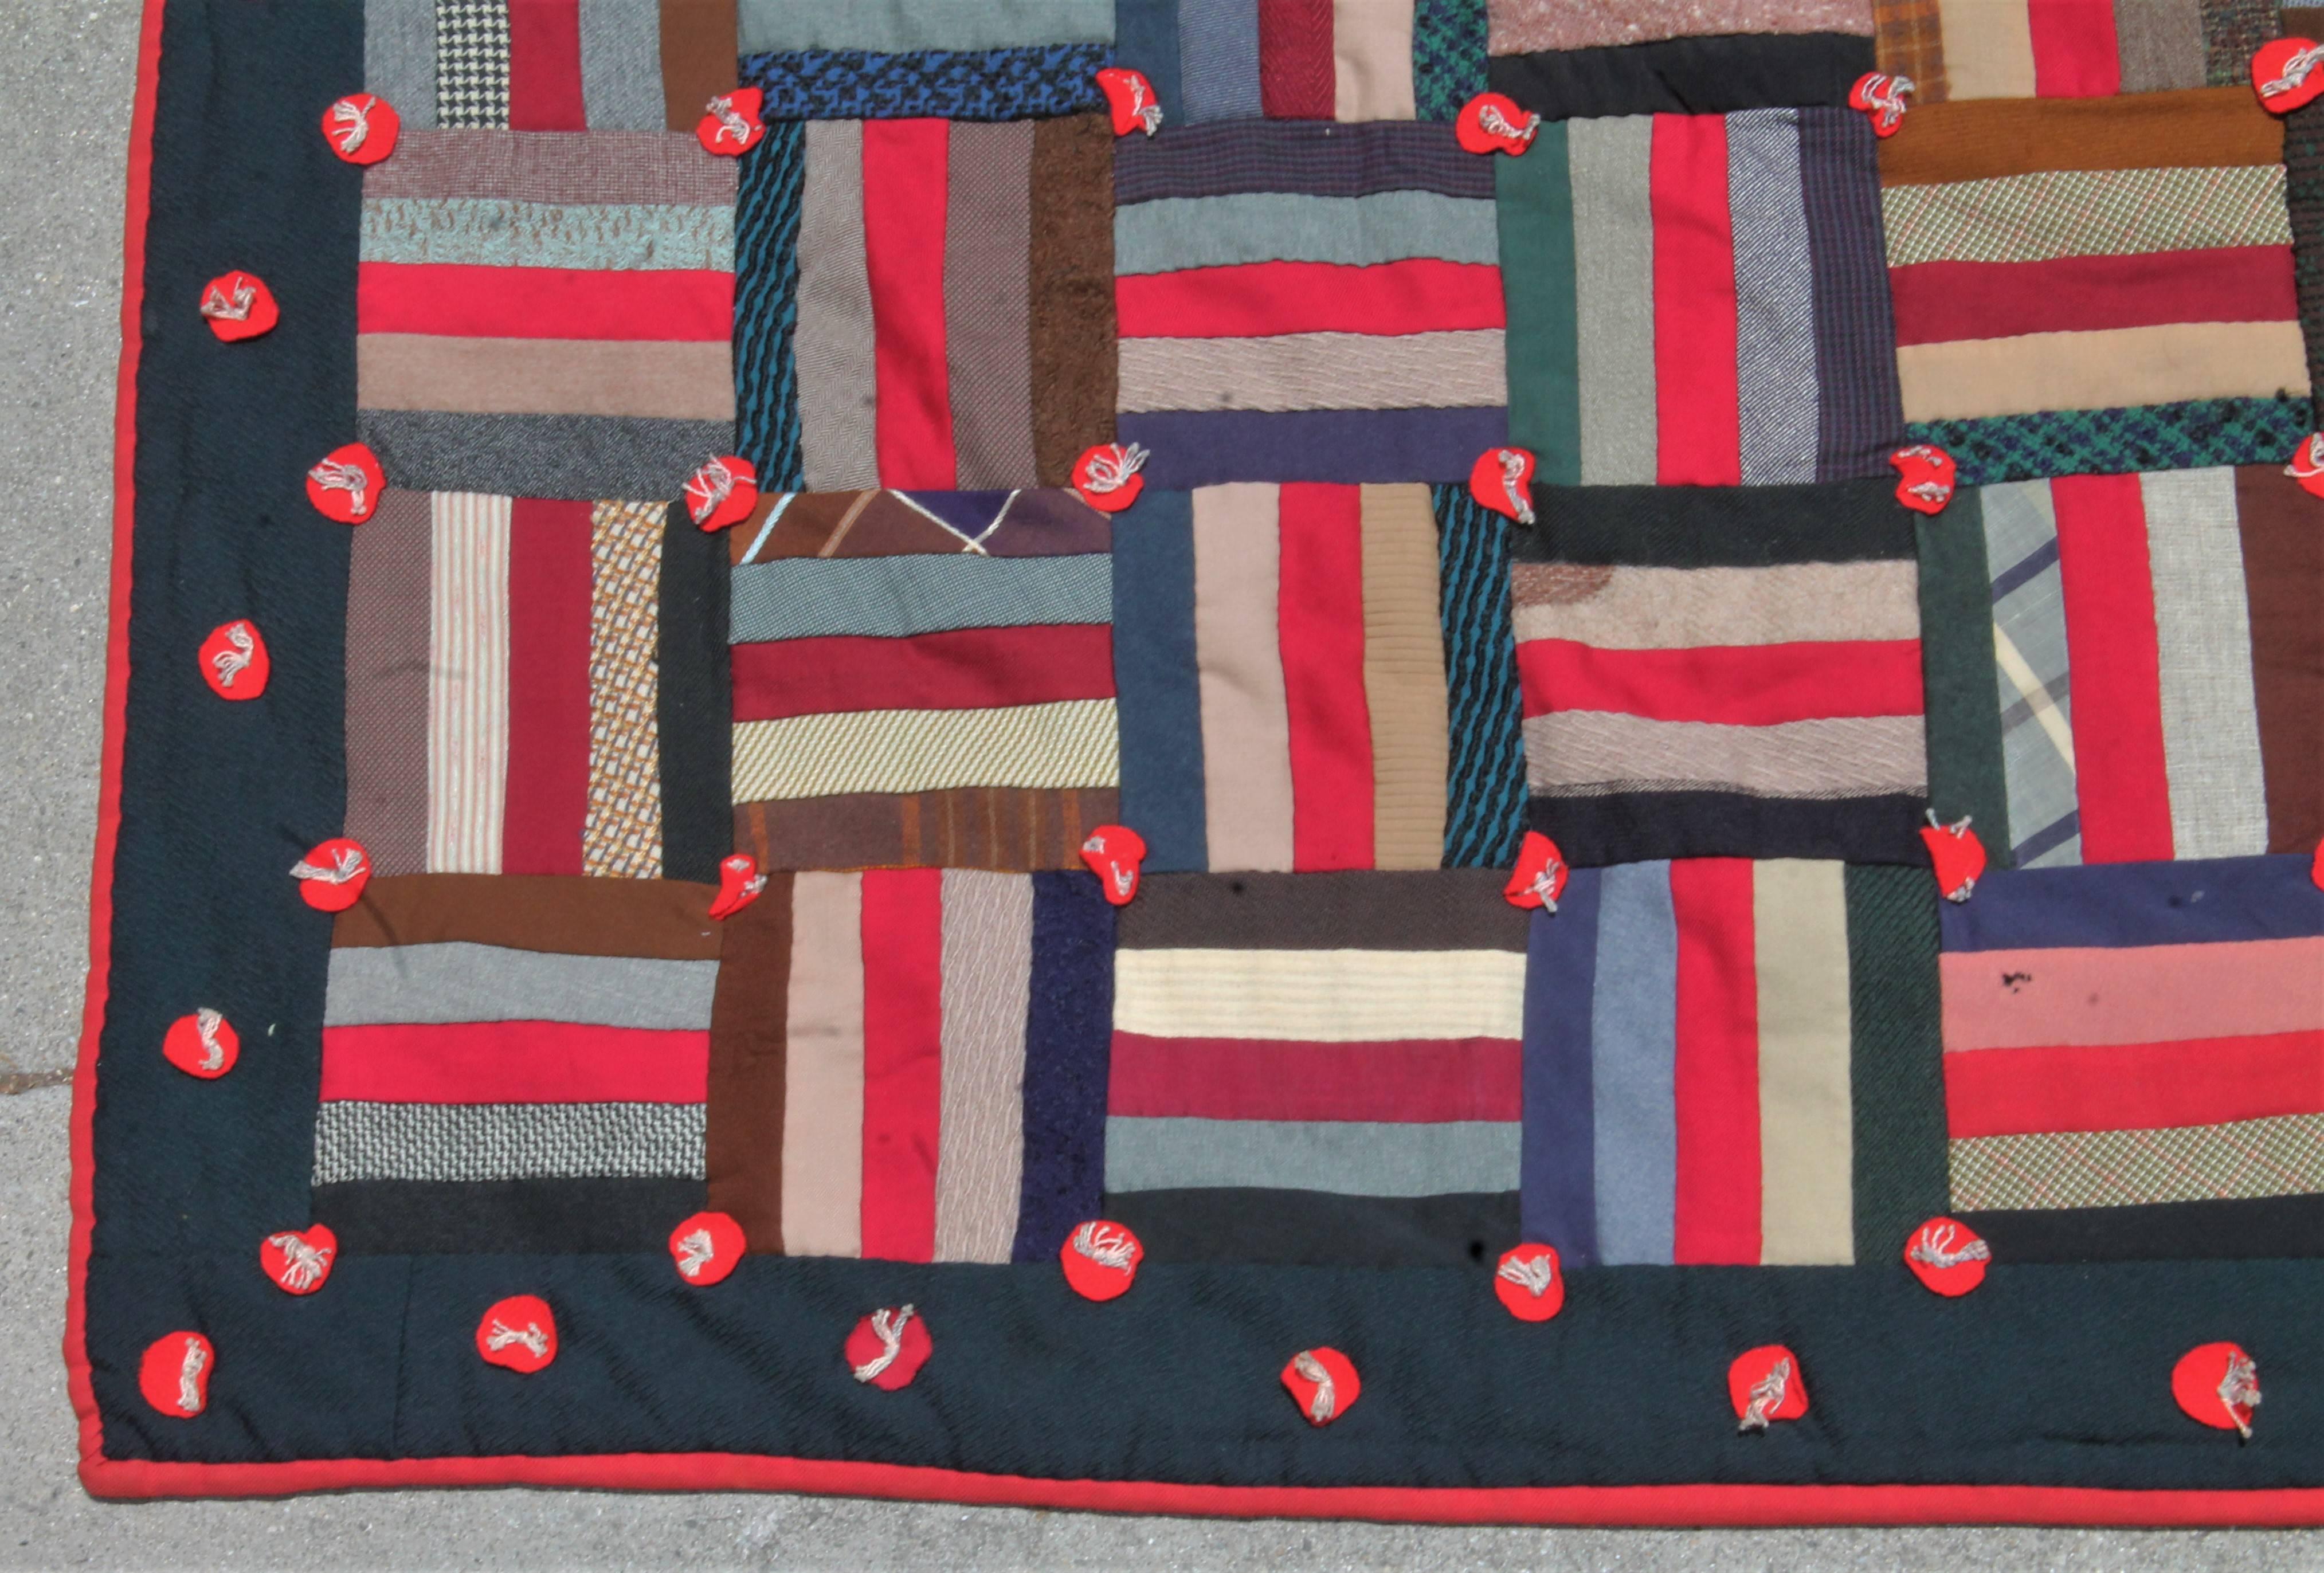 This wool tied log cabin quilt is in fine condition and has a wonderful floral backing in cotton sateen. It was found in Pennsylvania. It has little button ties through out. Great colors.